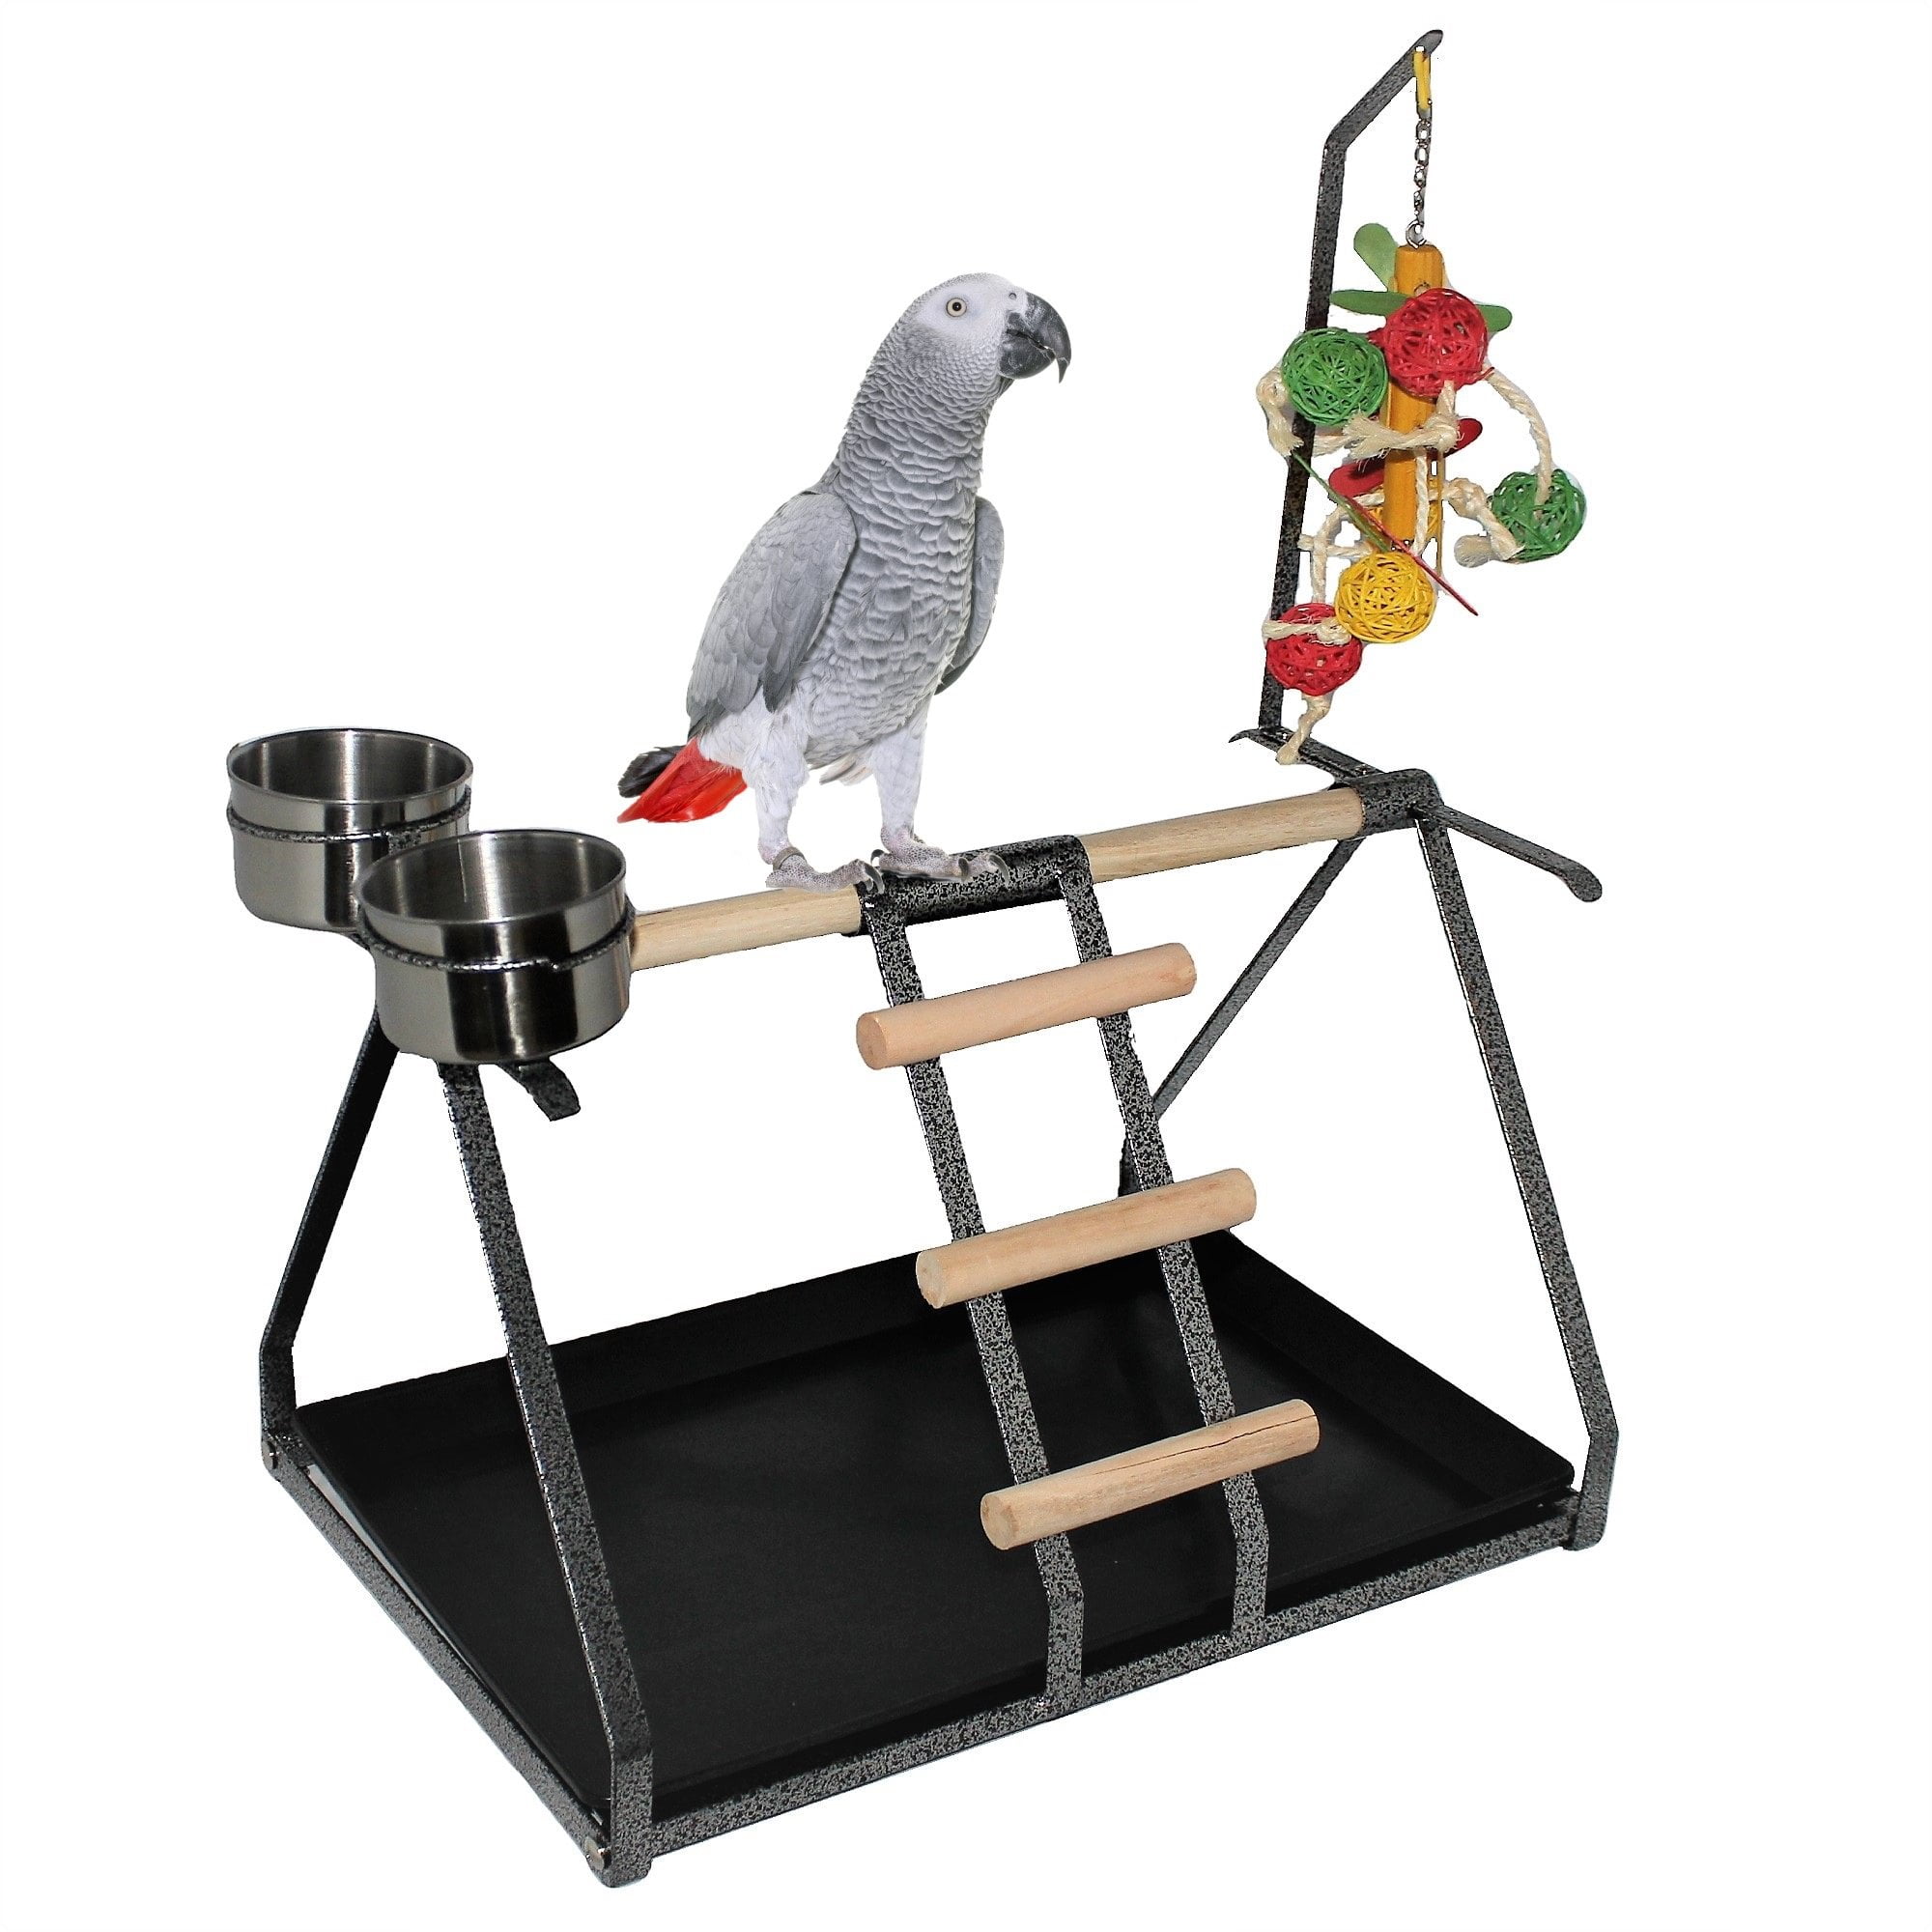 HOT!!!! Manzanita Parrot Perch for your 36" wide Bird Cage!! 